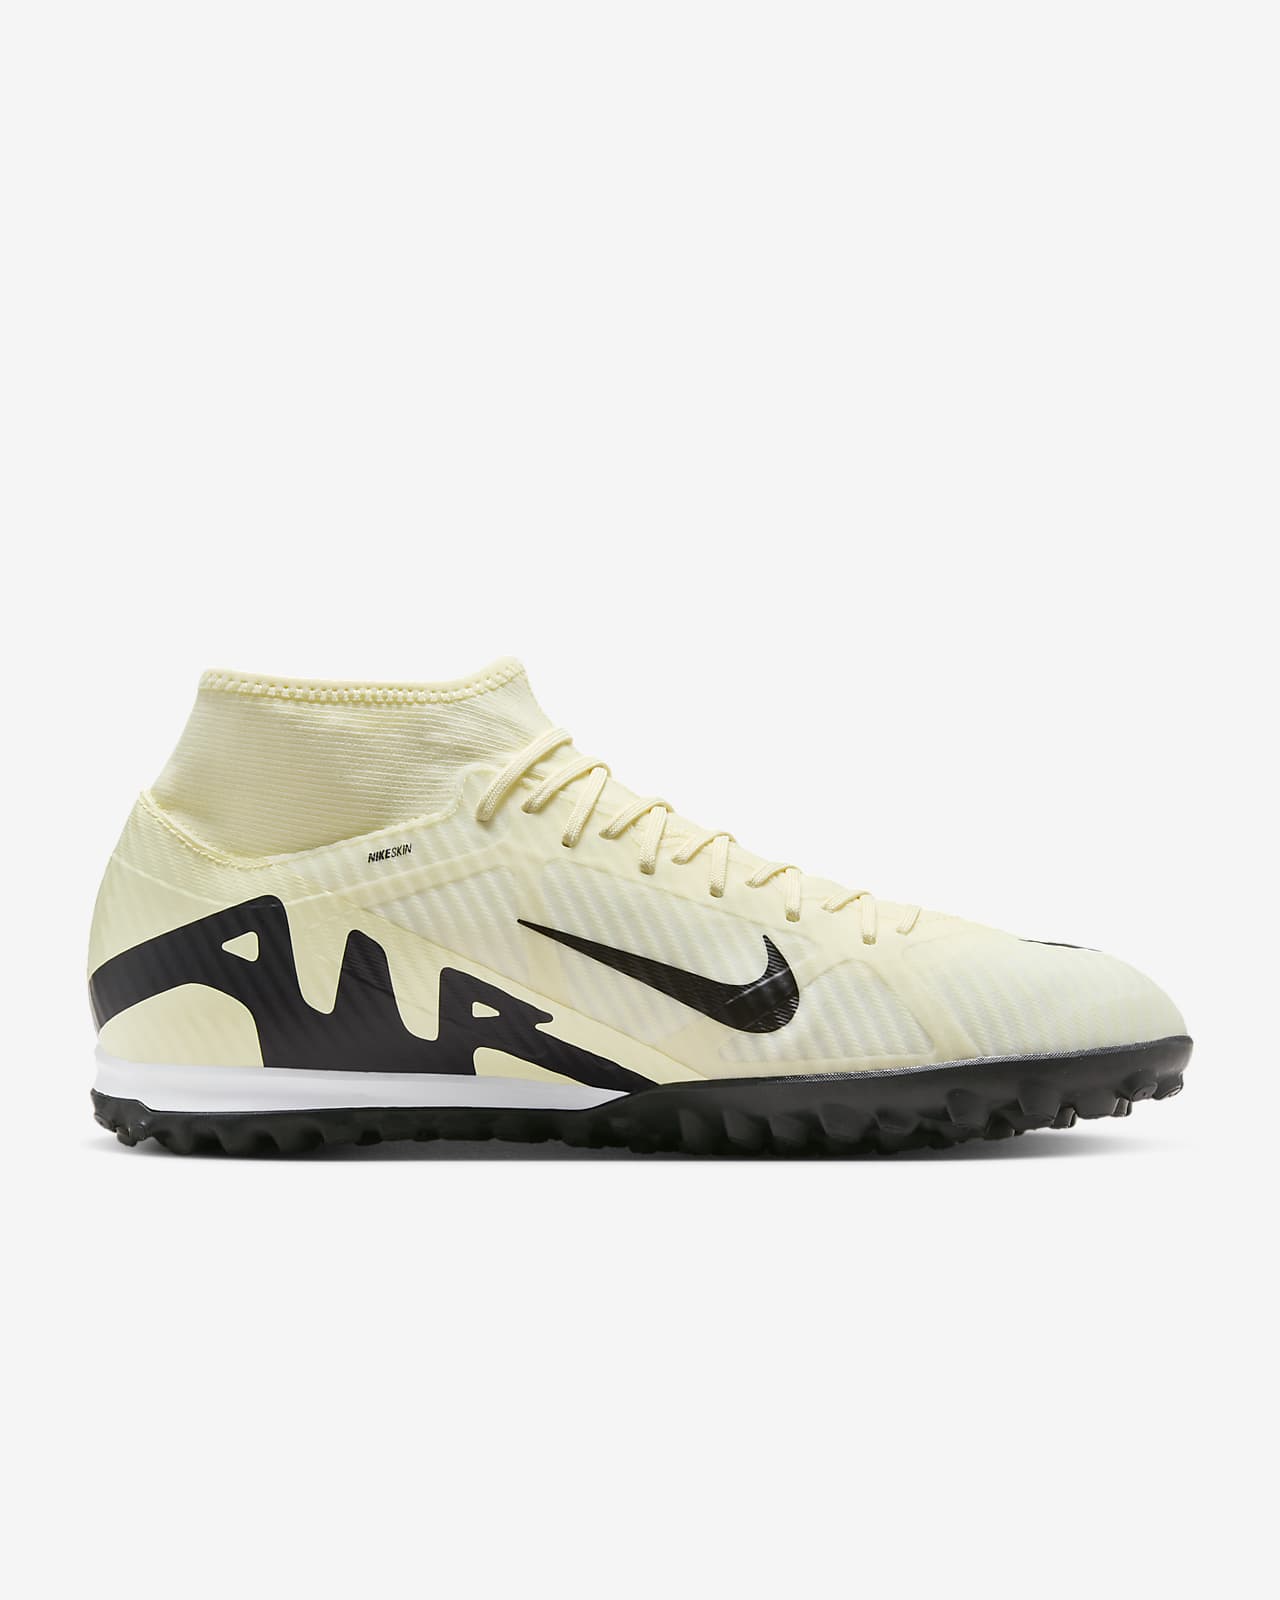 Nike chaussure foot - Cdiscount